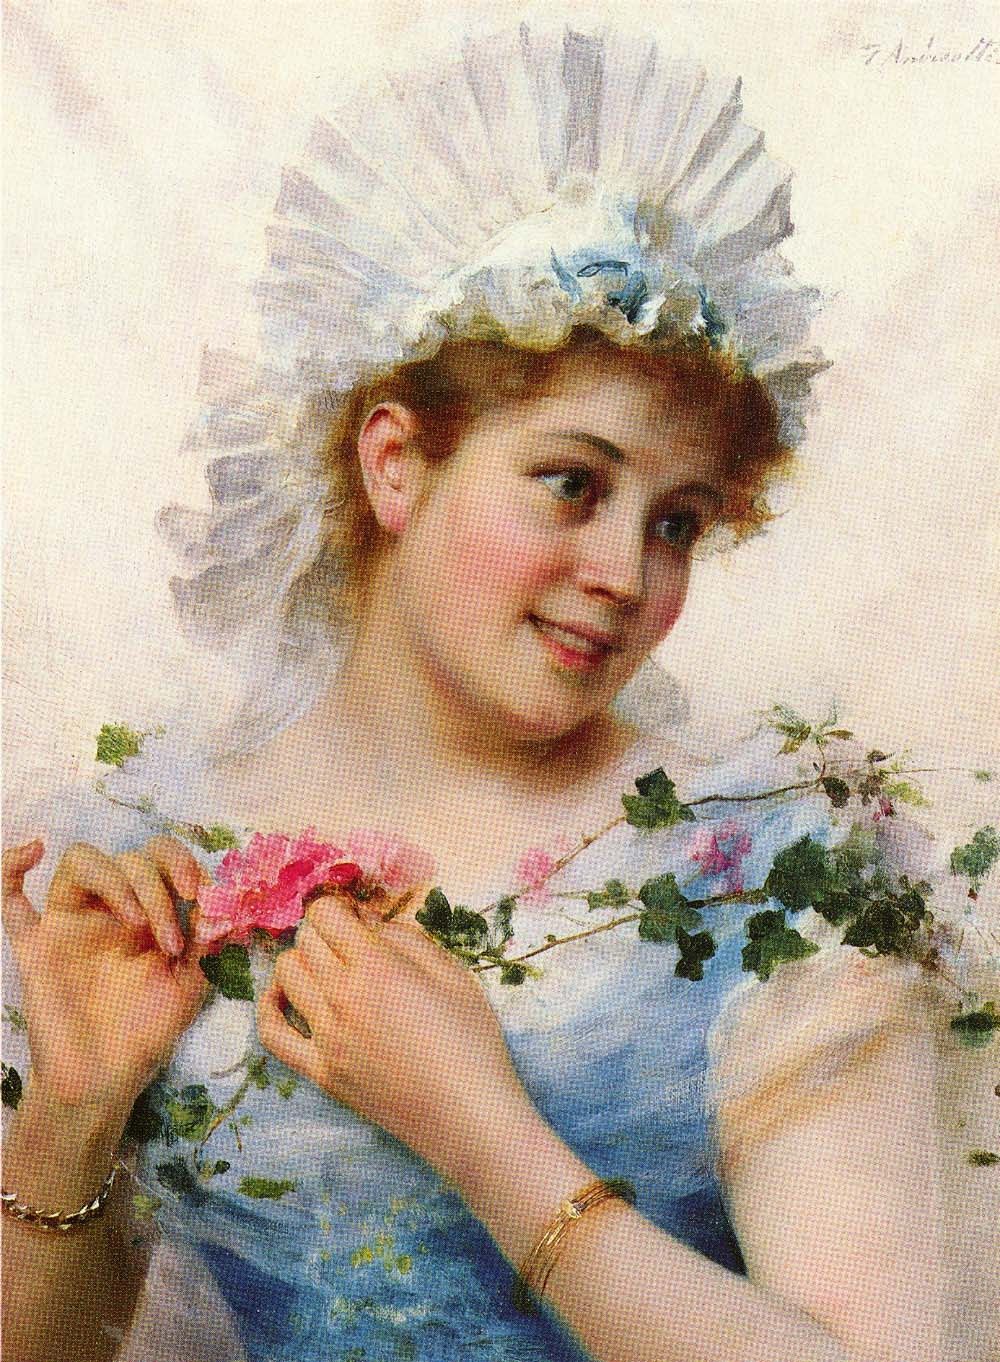 Federico Andreotti A Young Girl With Roses